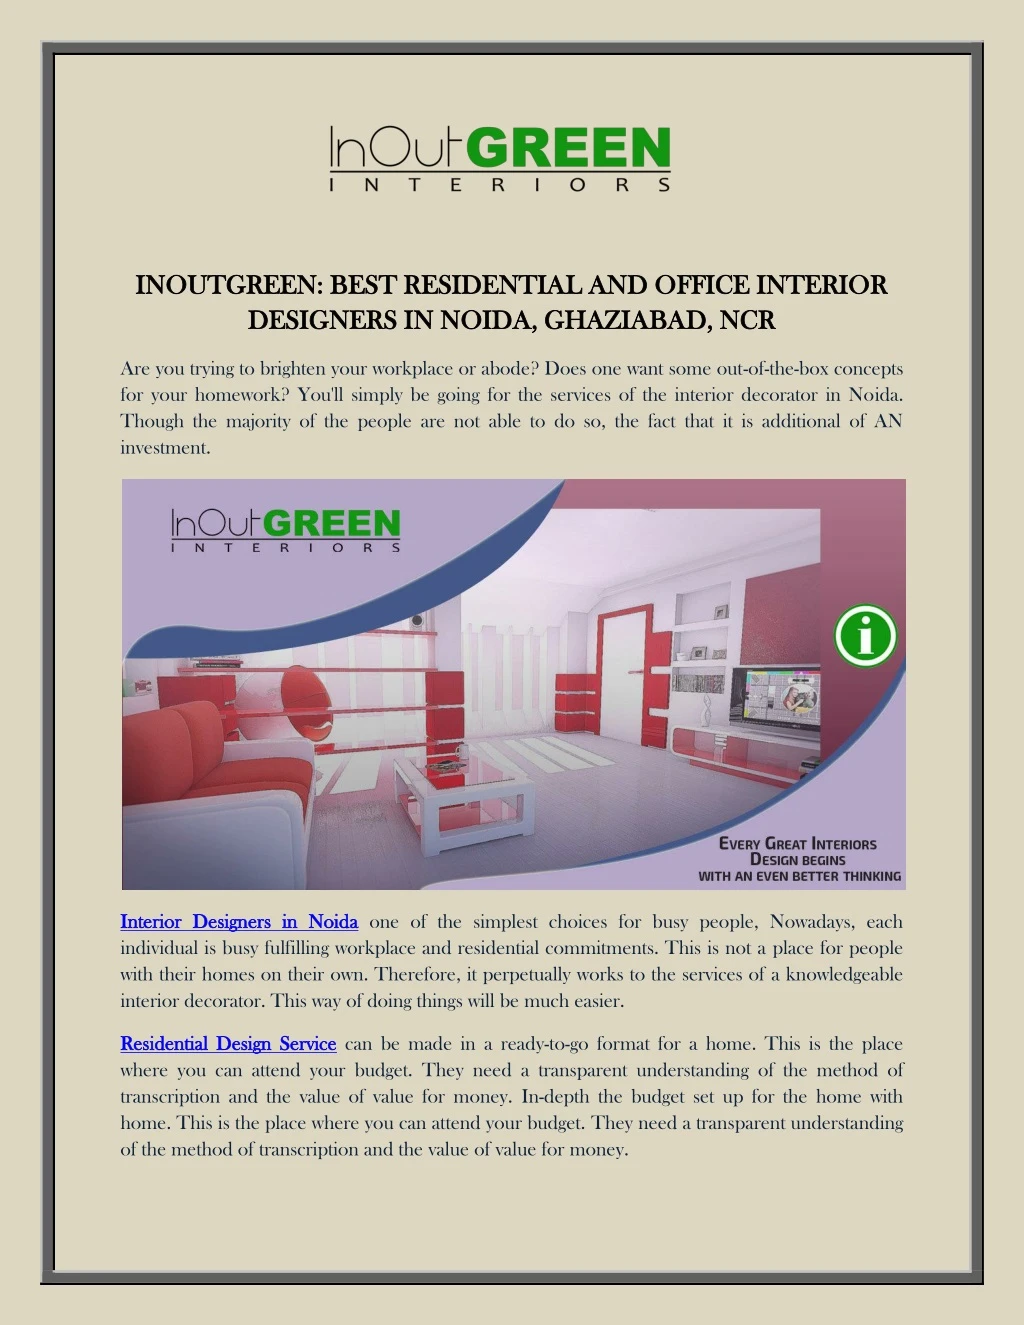 inoutgreen best residential and office interior